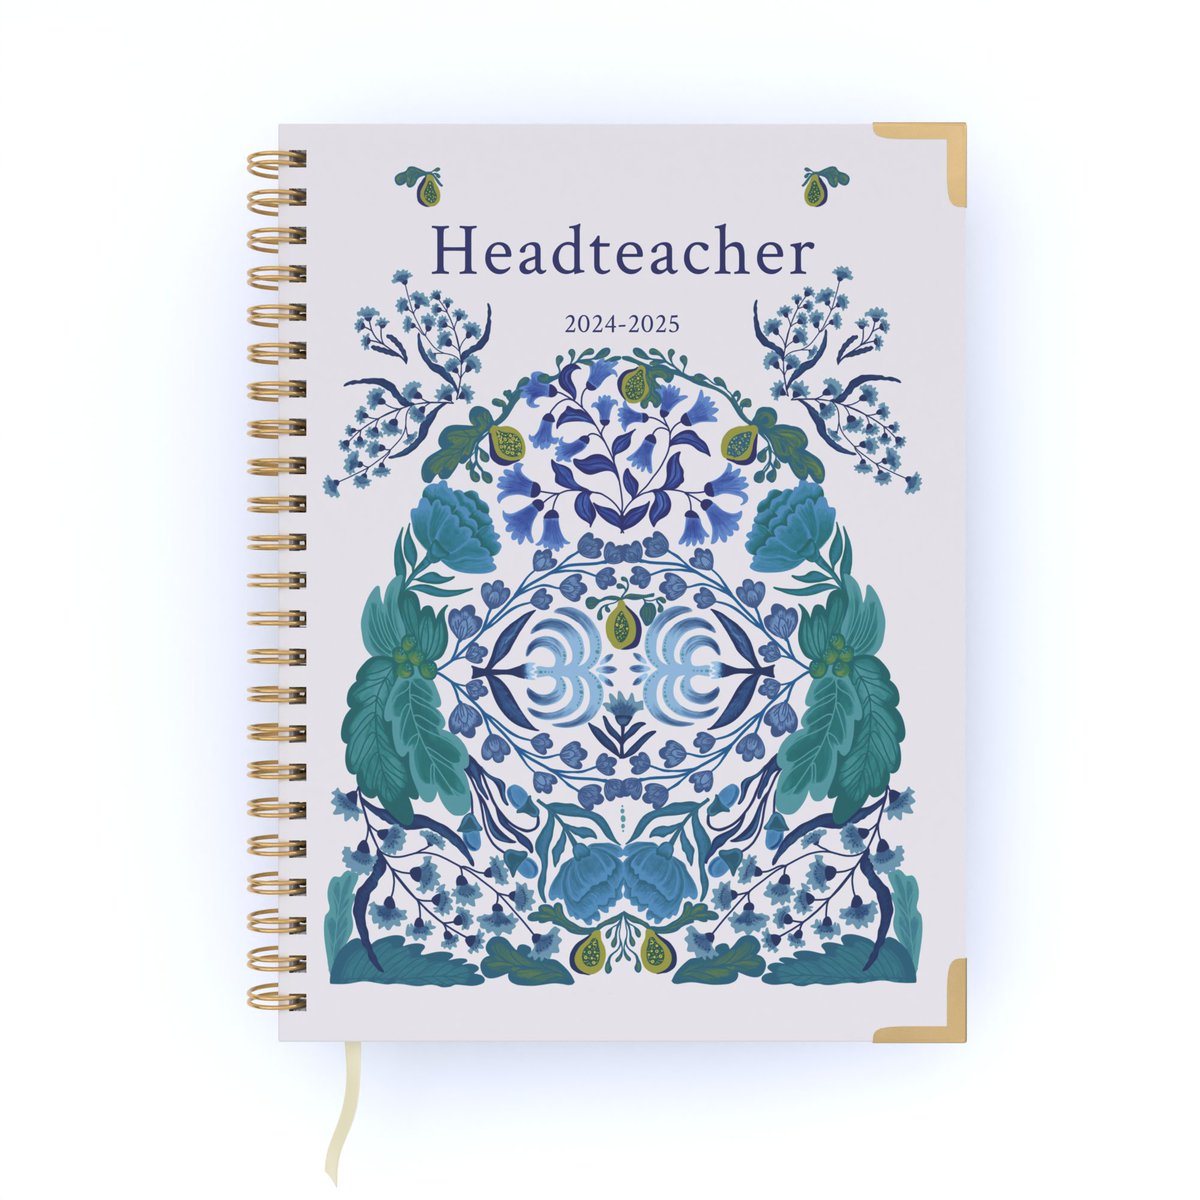 Need a new school leader planner? Get yours for a chance to win it FREE! Every order before Sunday 28th at 10 pm is a chance to win a full refund. Shop now: headteacherchat.com